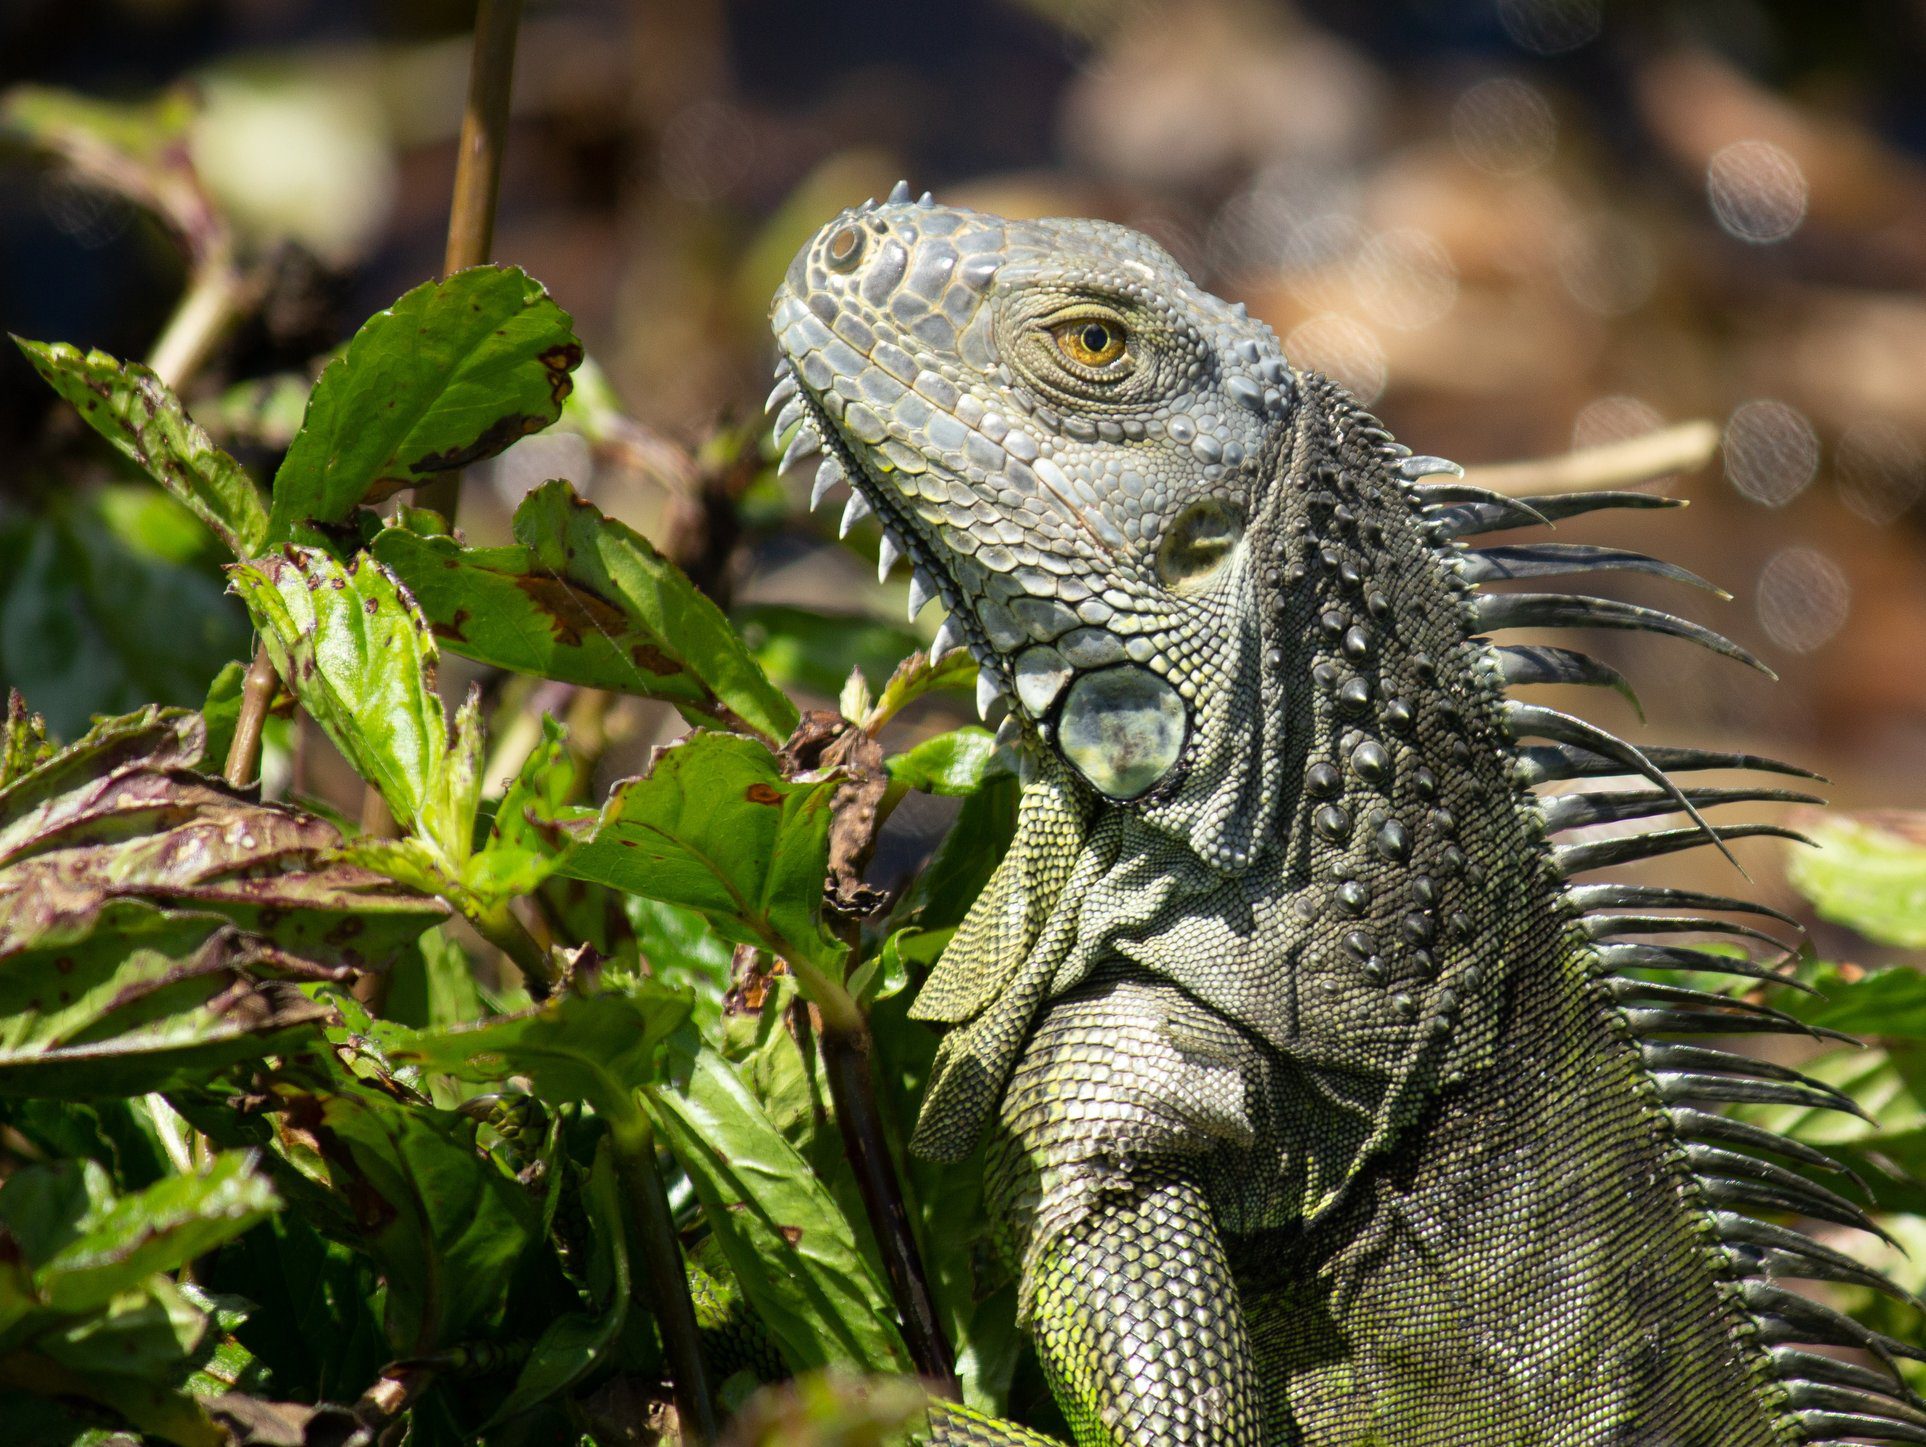 How to get rid of iguanas? IGUANA REMOVAL